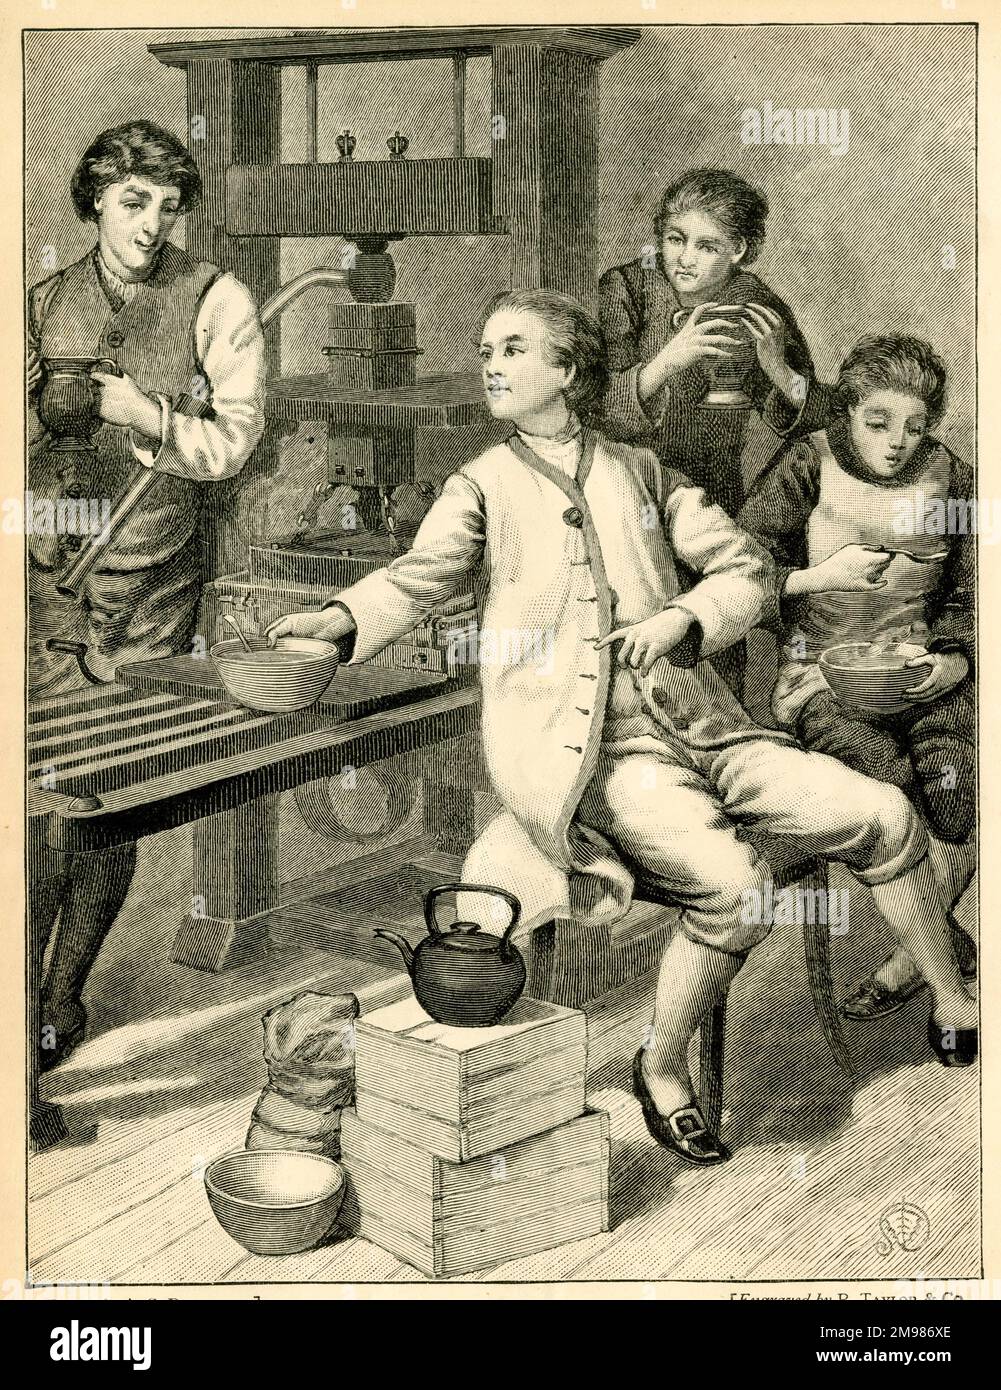 An Incident in the Life of Benjamin Franklin (1706-1790), when as a young man he worked in the printing trade. Stock Photo